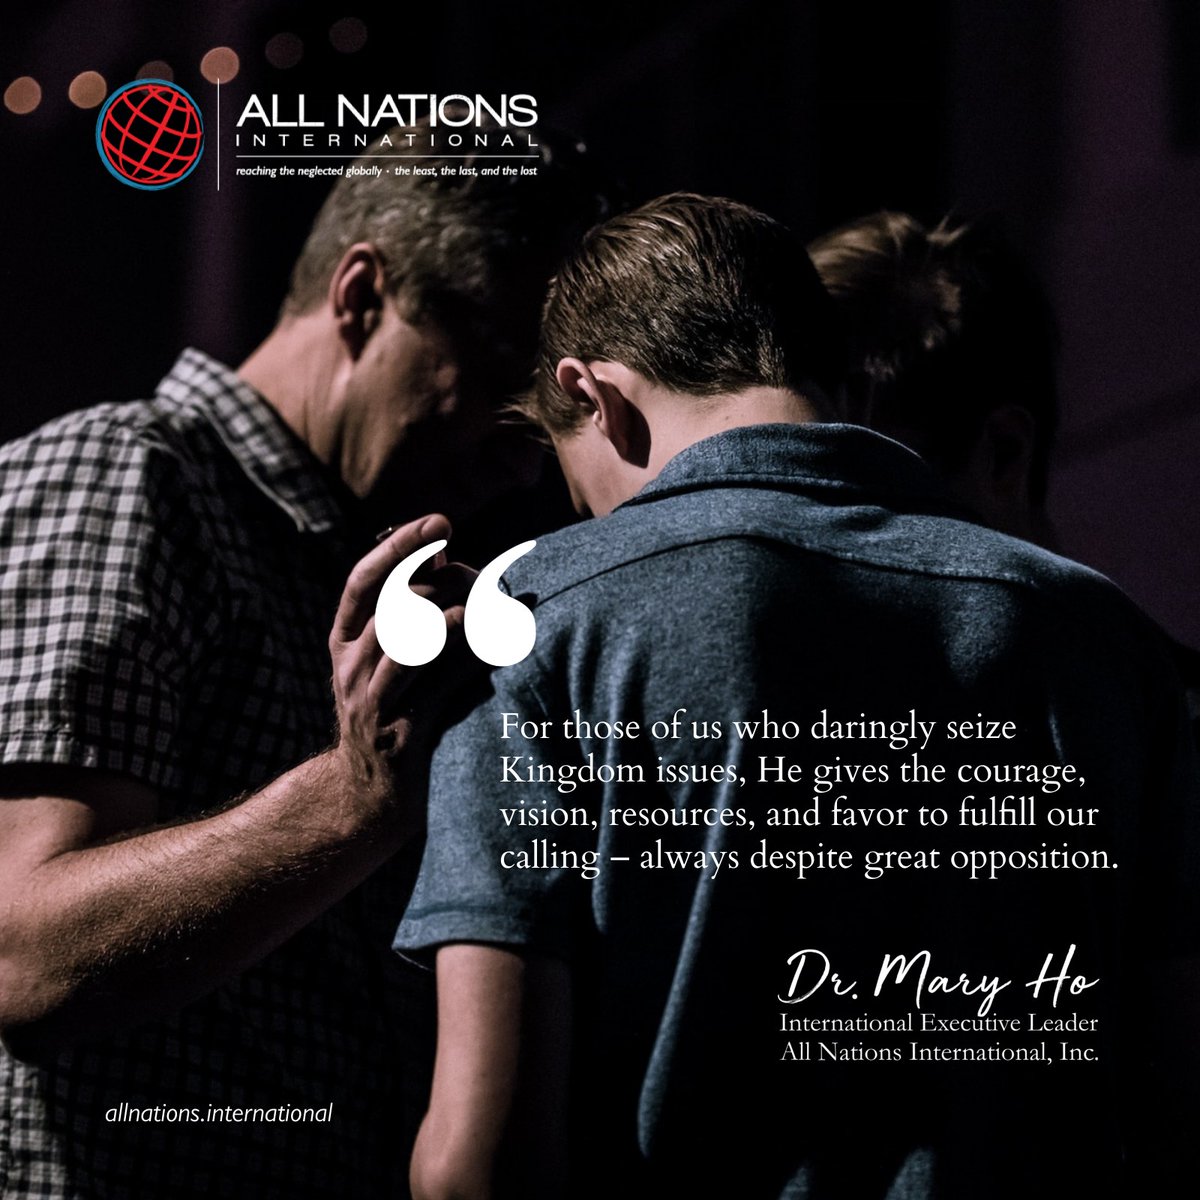 'Count  it all joy, my brothers, when you meet trials of various kinds, for you  know that the testing of your faith produces steadfastness.' (James 1:2-3)

Newsletter: tinyurl.com/mrwadcpx

#AllNations #DrMaryHo #reachingtheneglected #soallwillworshipjesus #christianquote